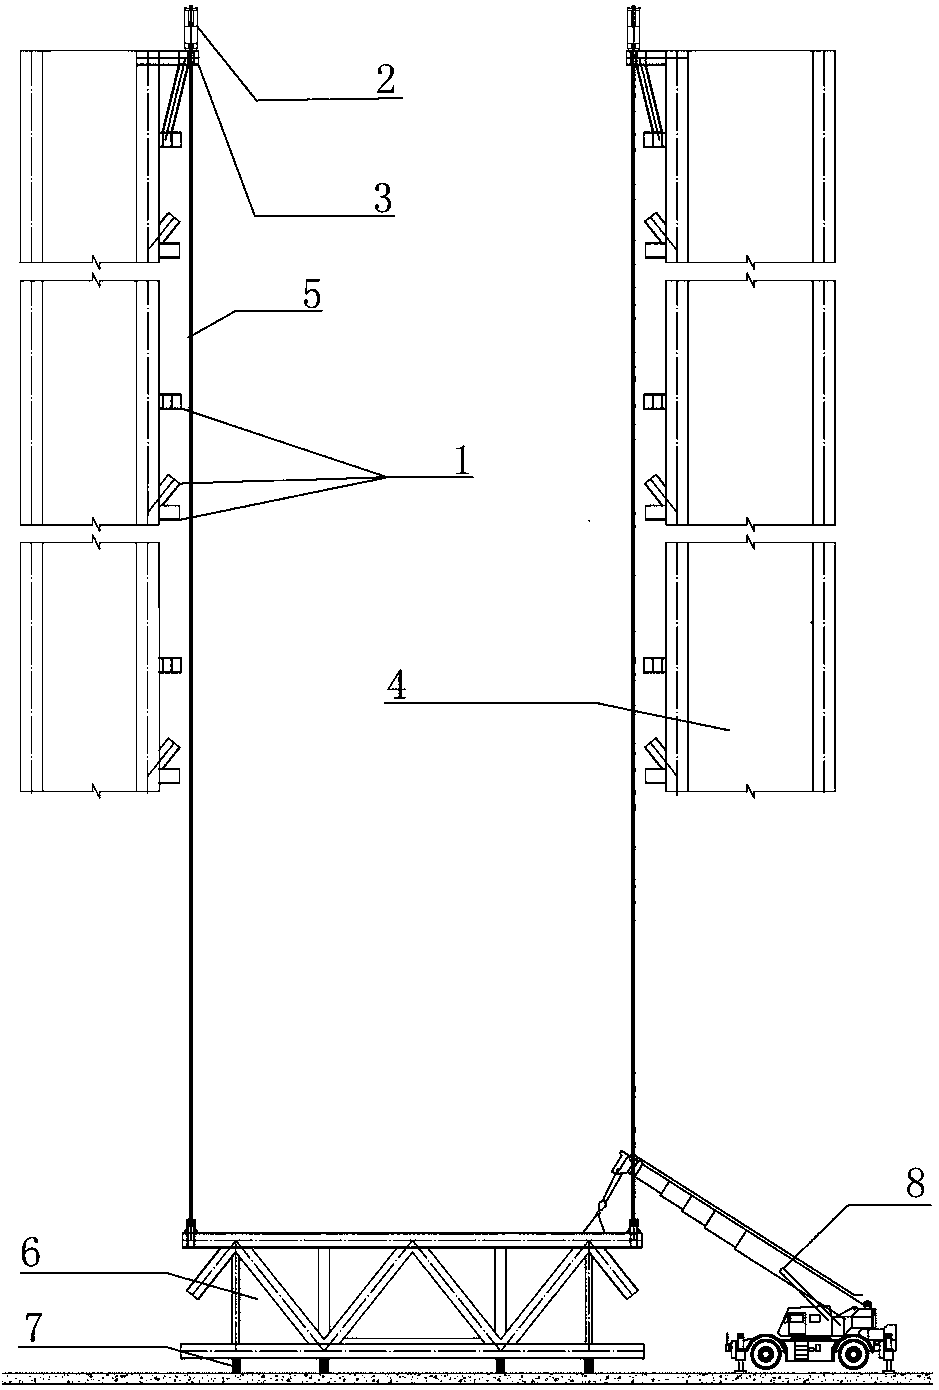 A lifting construction method for multiple steel corridors between towers